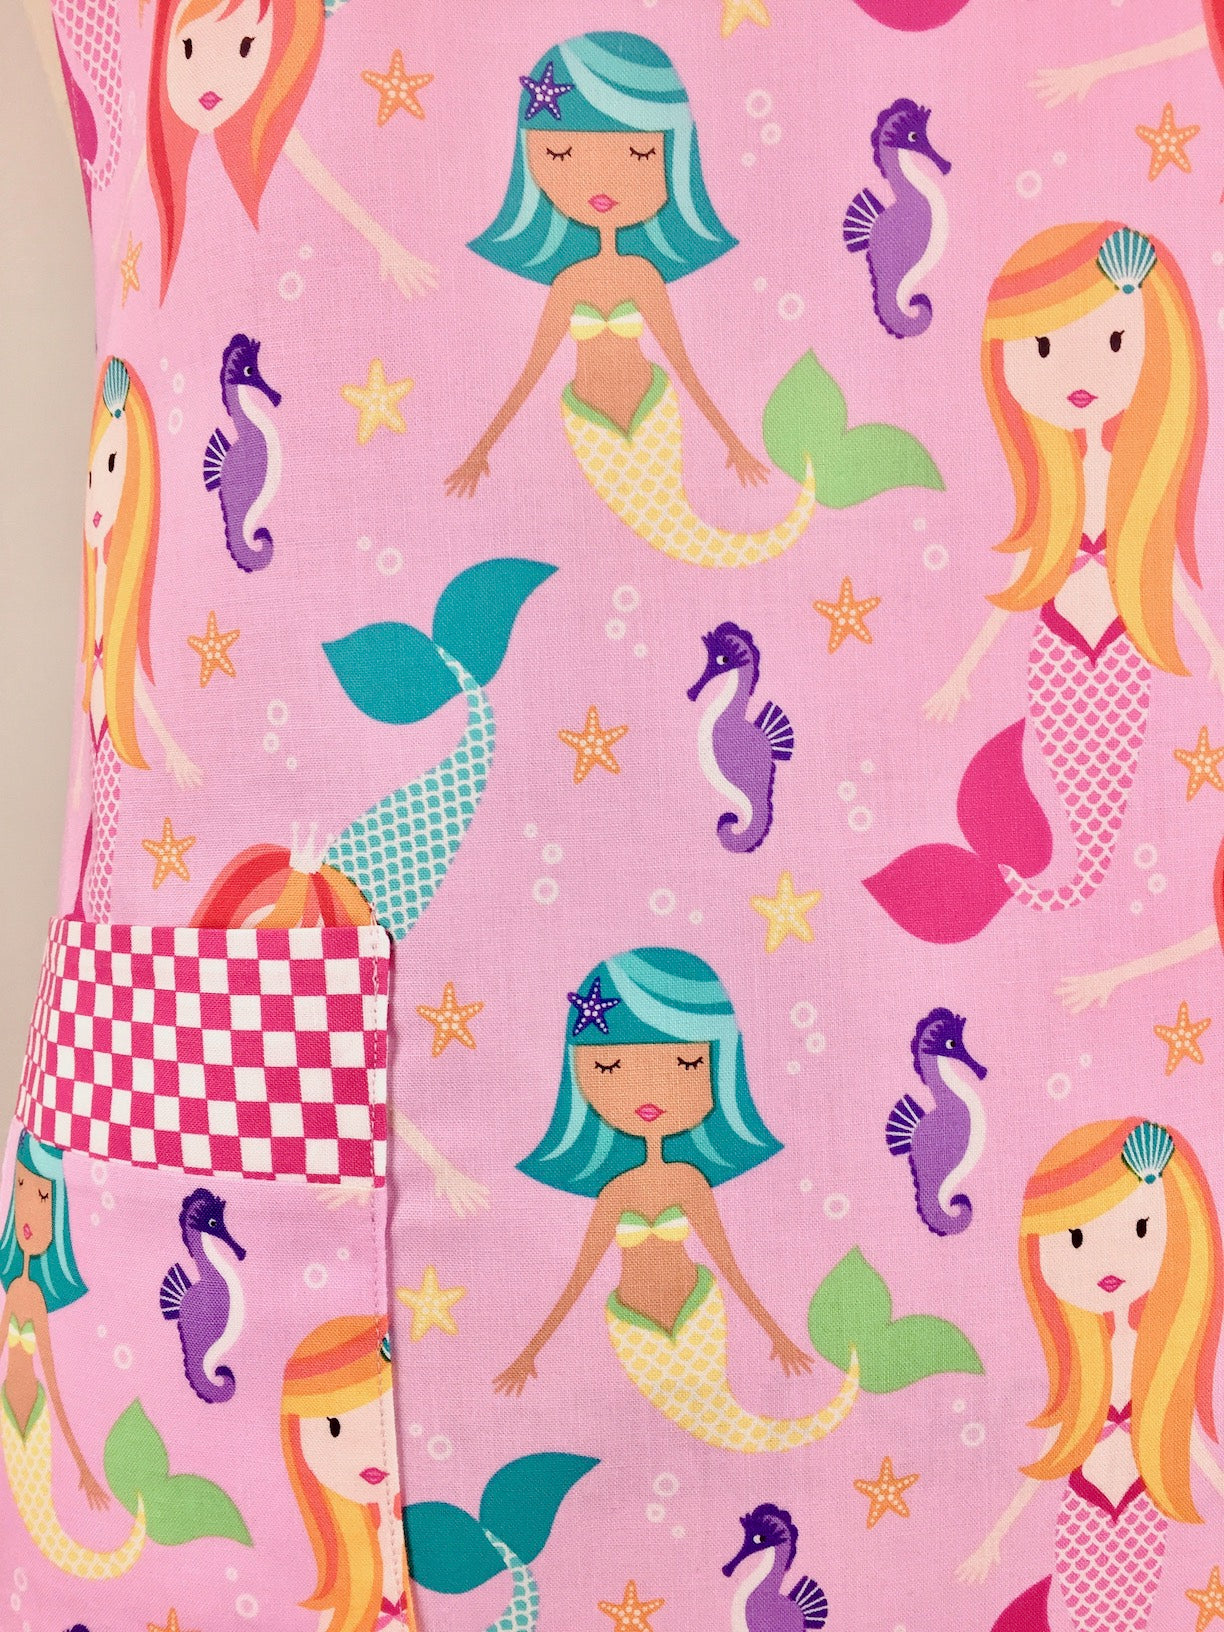 Mermaid Play Apron-The Blue Peony-Age Group_Adult,Animal_Mermaid,Apron Style_Chef,Category_Apron,Color_Pink,Department_Kitchen,Material_Cotton,Theme_Water Life